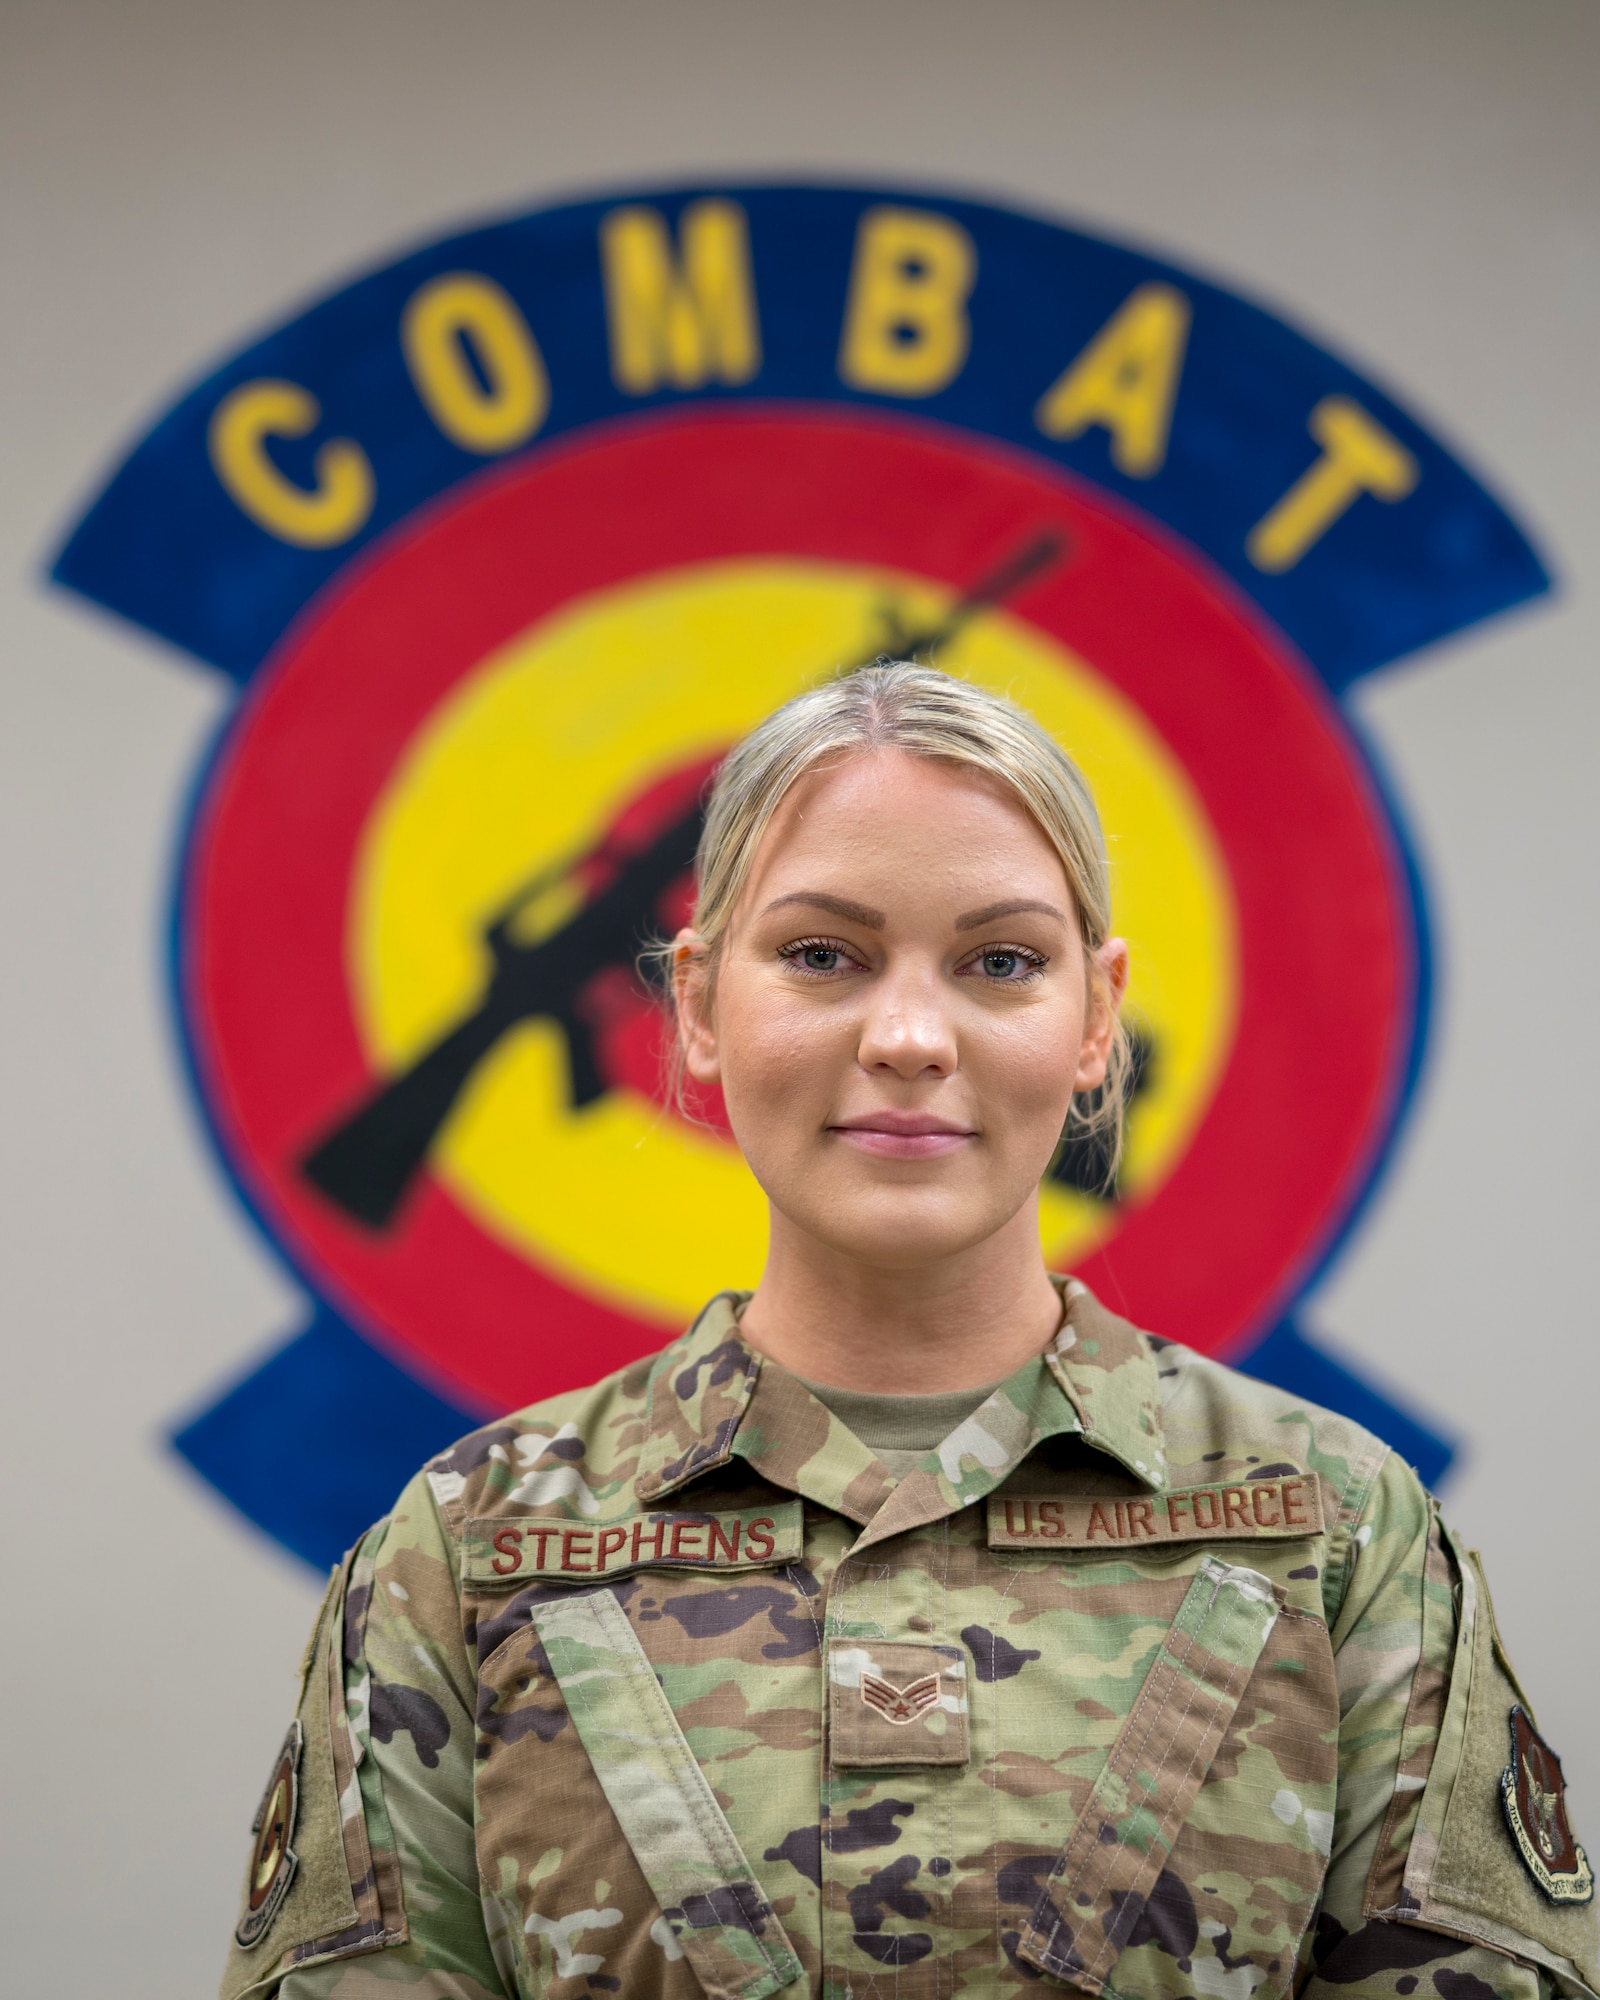 Senior Airman Jessica Stephens, 403rd Security Forces Squadron combat arms instructor. (U.S. Air Force photo by 2nd Lt. Christopher Carranza)